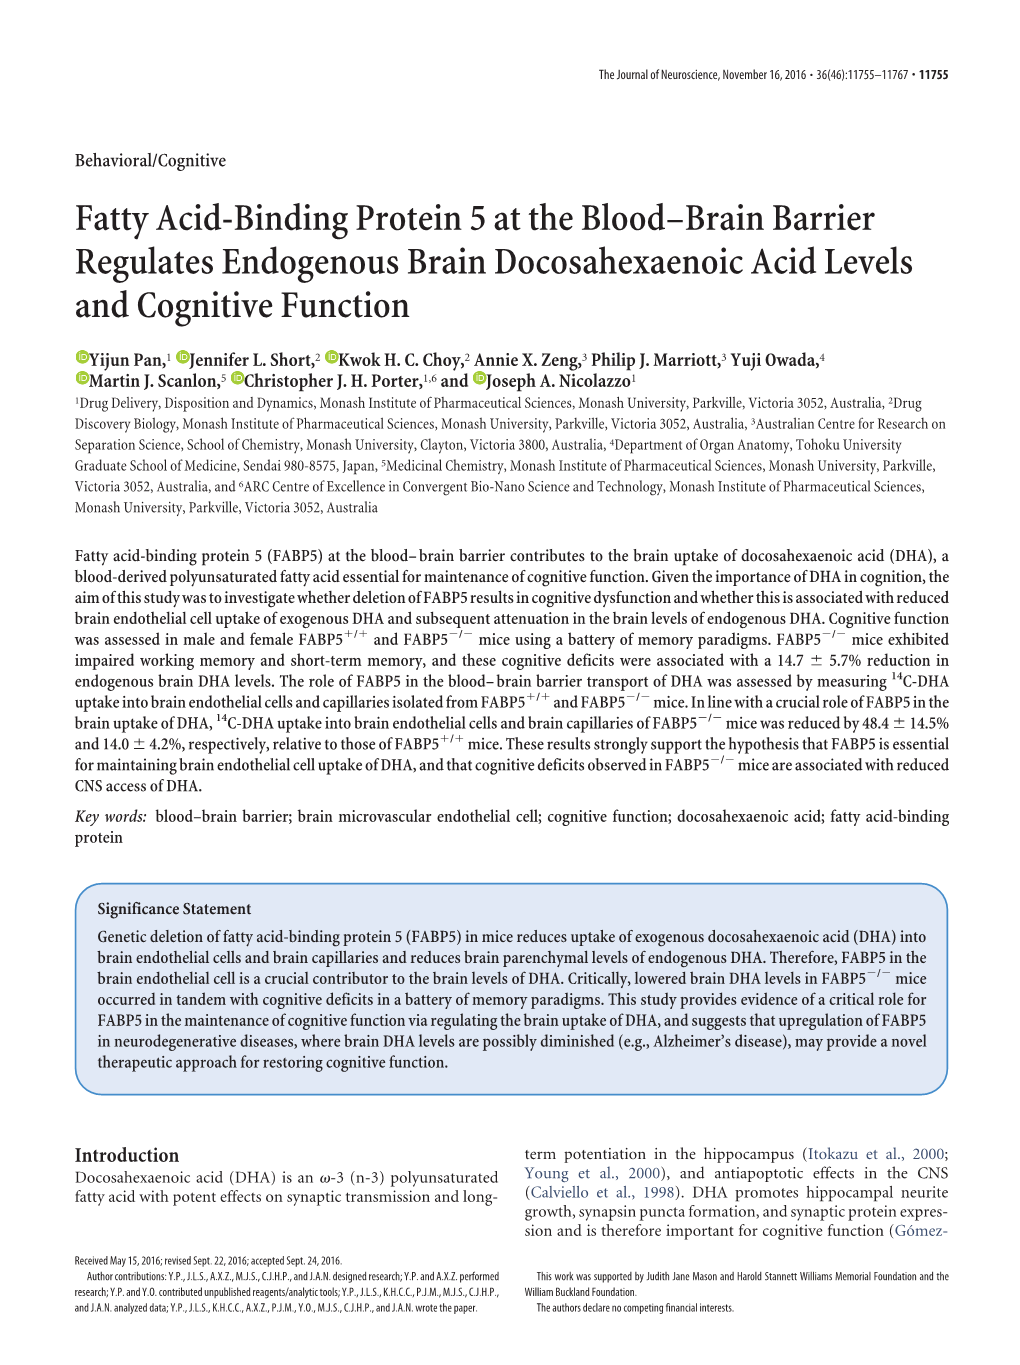 Fatty Acid-Binding Protein 5 at the Blood–Brain Barrier Regulates Endogenous Brain Docosahexaenoic Acid Levels and Cognitive Function